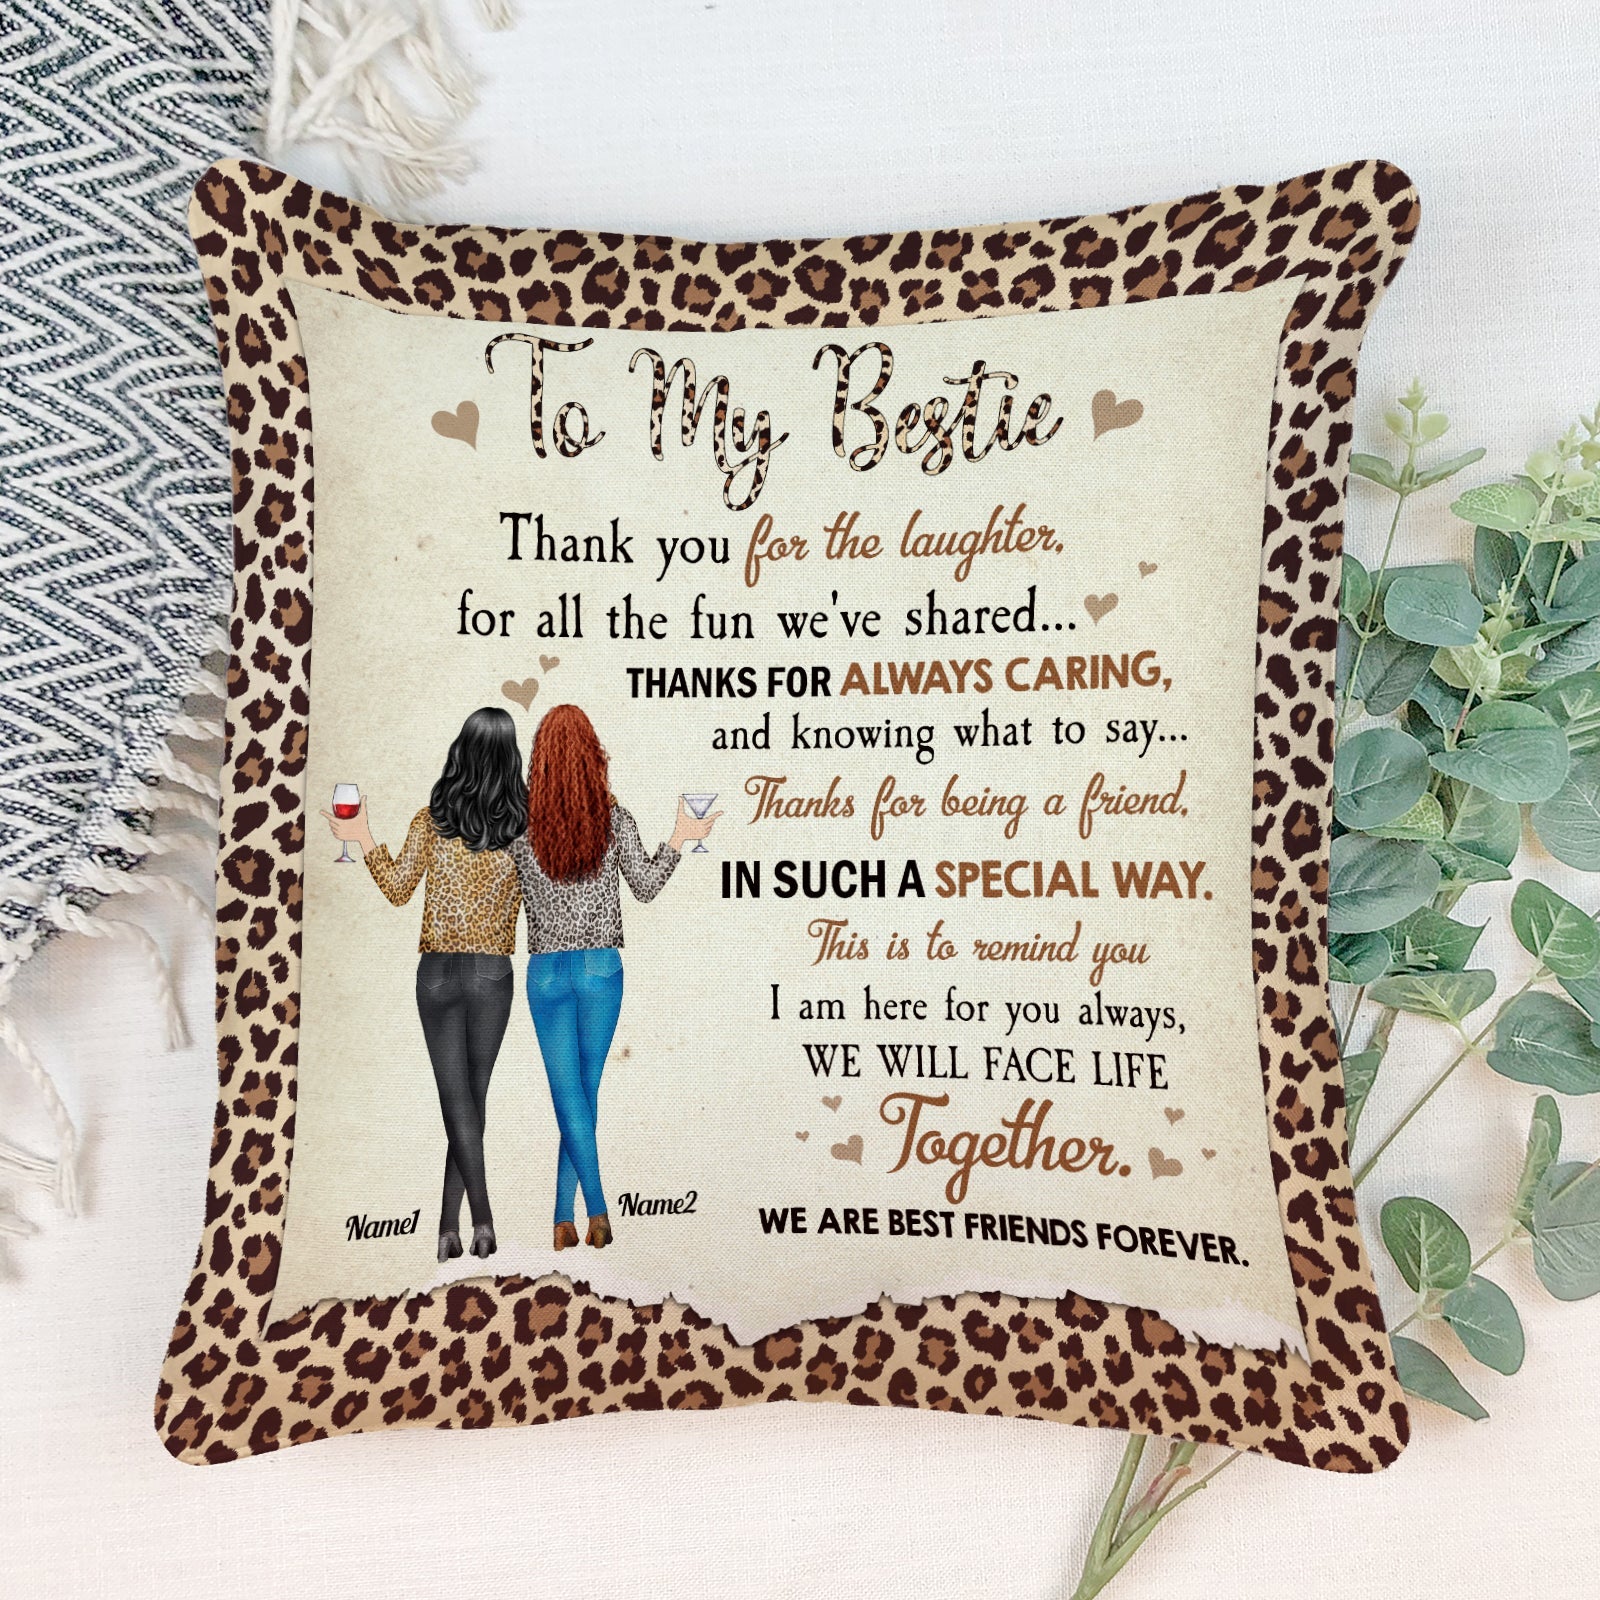 Kitty Best Friends Personalized Satin Cushion: Gift/Send Home Gifts Online  J11141741 |IGP.com